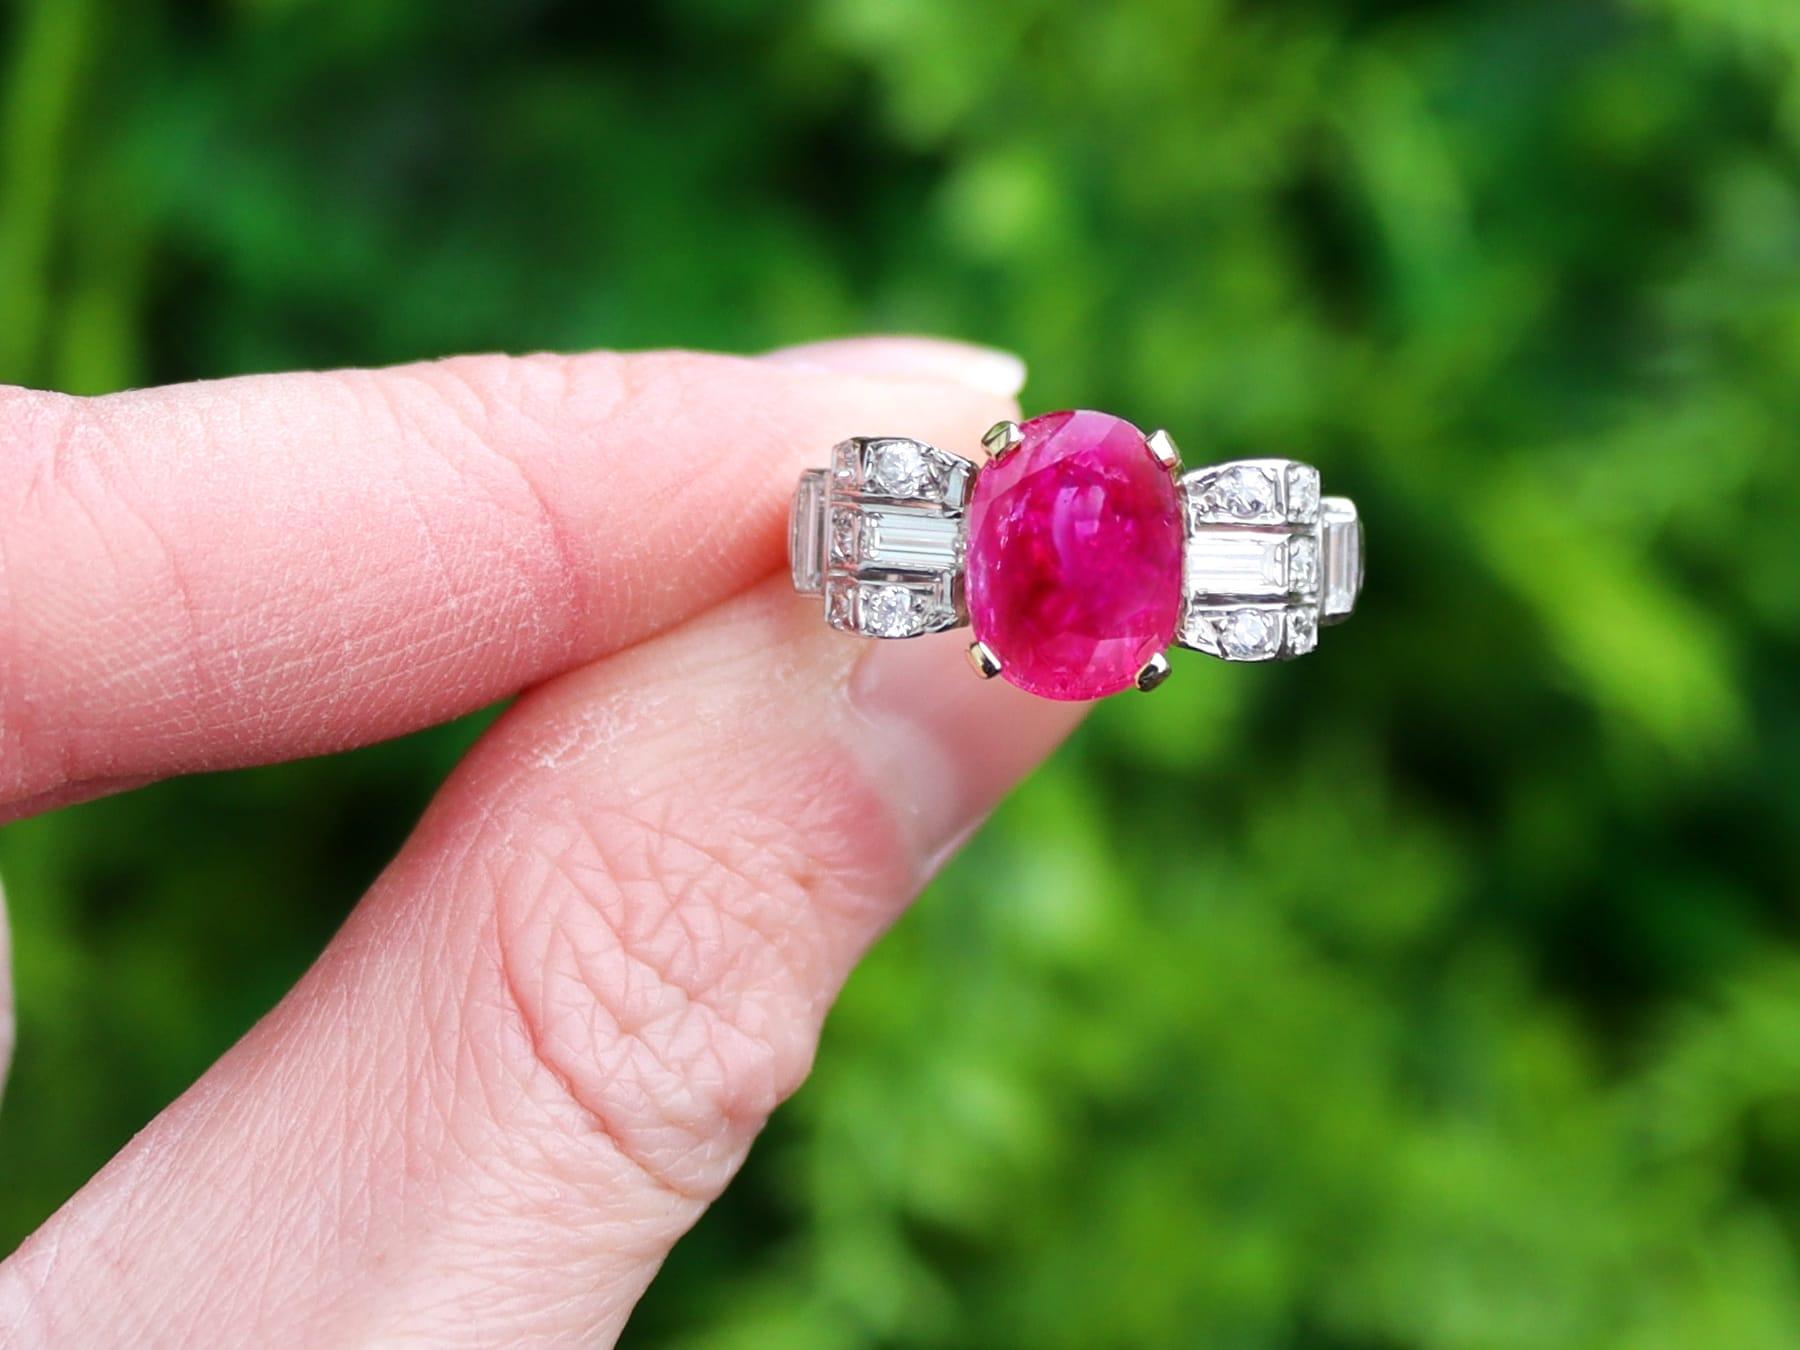 A stunning, fine and impressive antique 4.67 carat Burmese ruby and 0.86 carat diamond, platinum cocktail ring; part of our diverse gemstone jewellery and collections.

This stunning antique ruby ring with diamonds has been crafted in platinum with